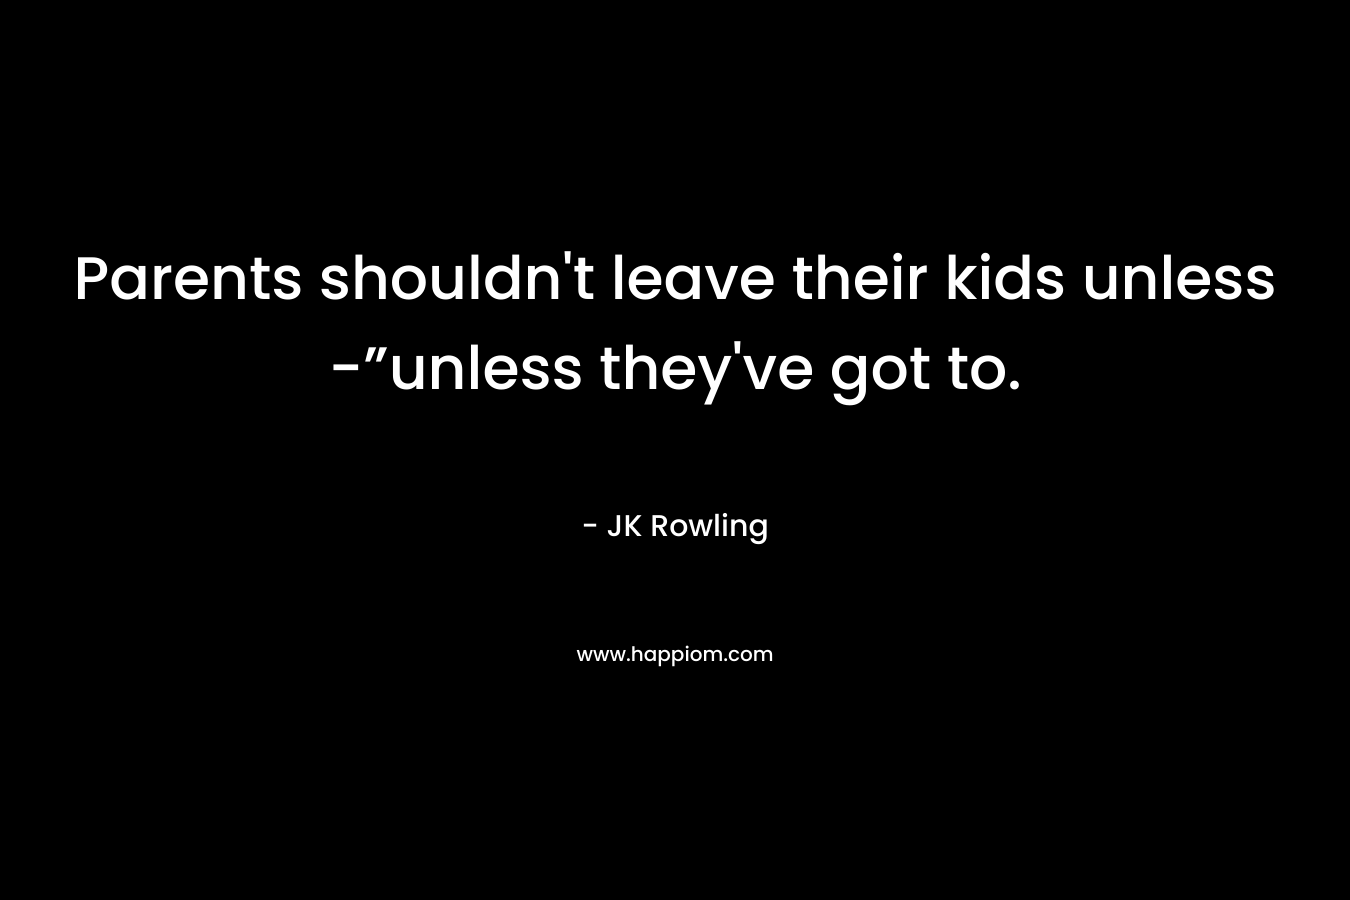 Parents shouldn't leave their kids unless -”unless they've got to.